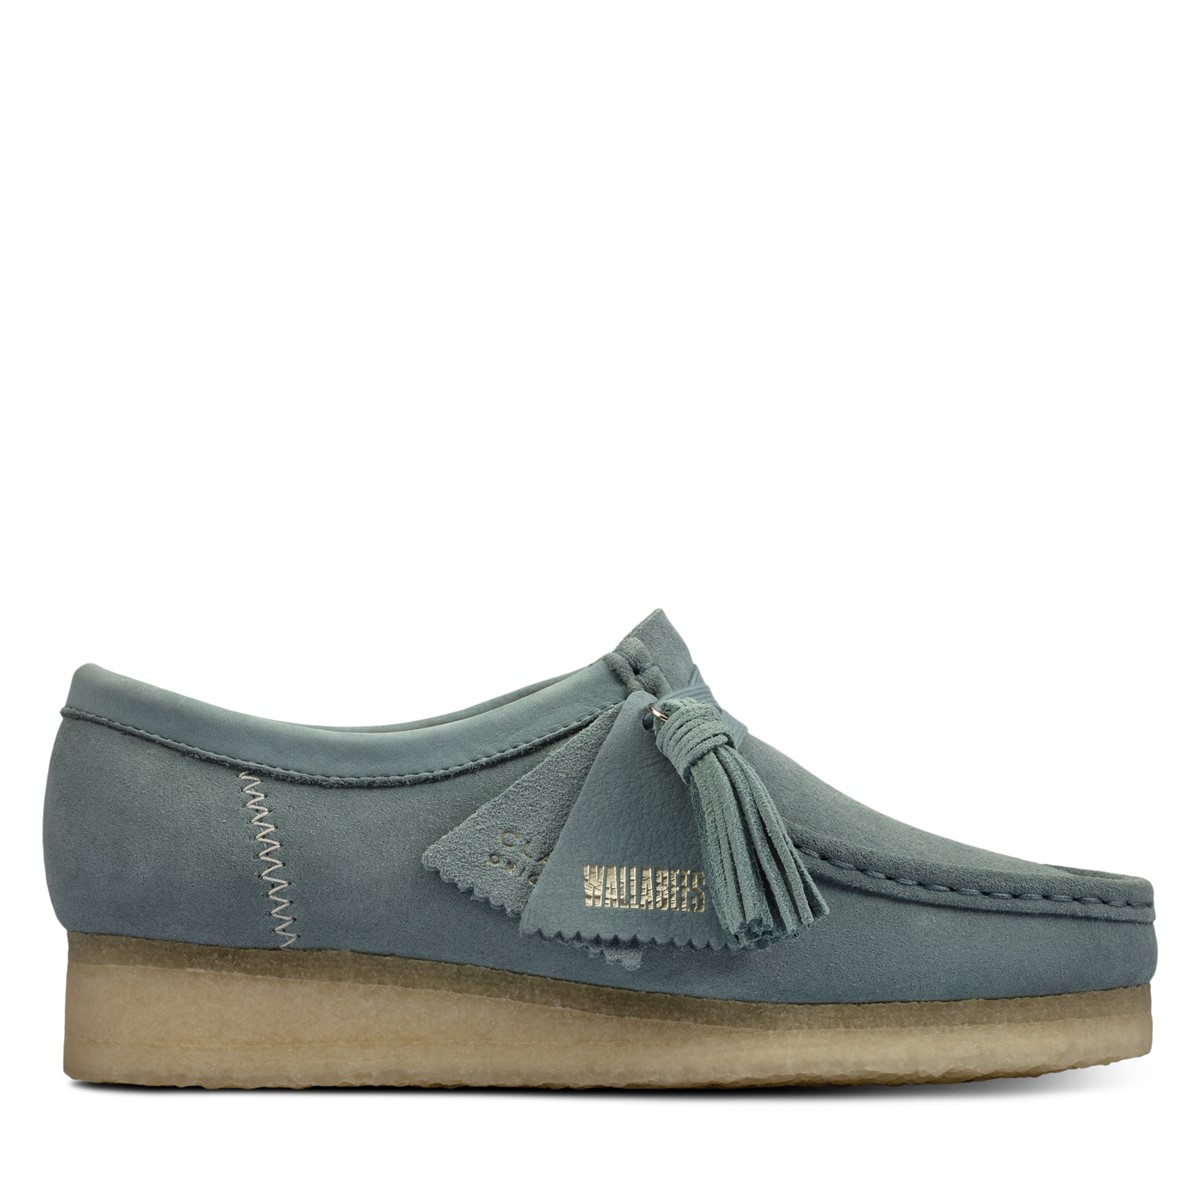 Chaussures style mocassin Wallabee bleues pour femmes